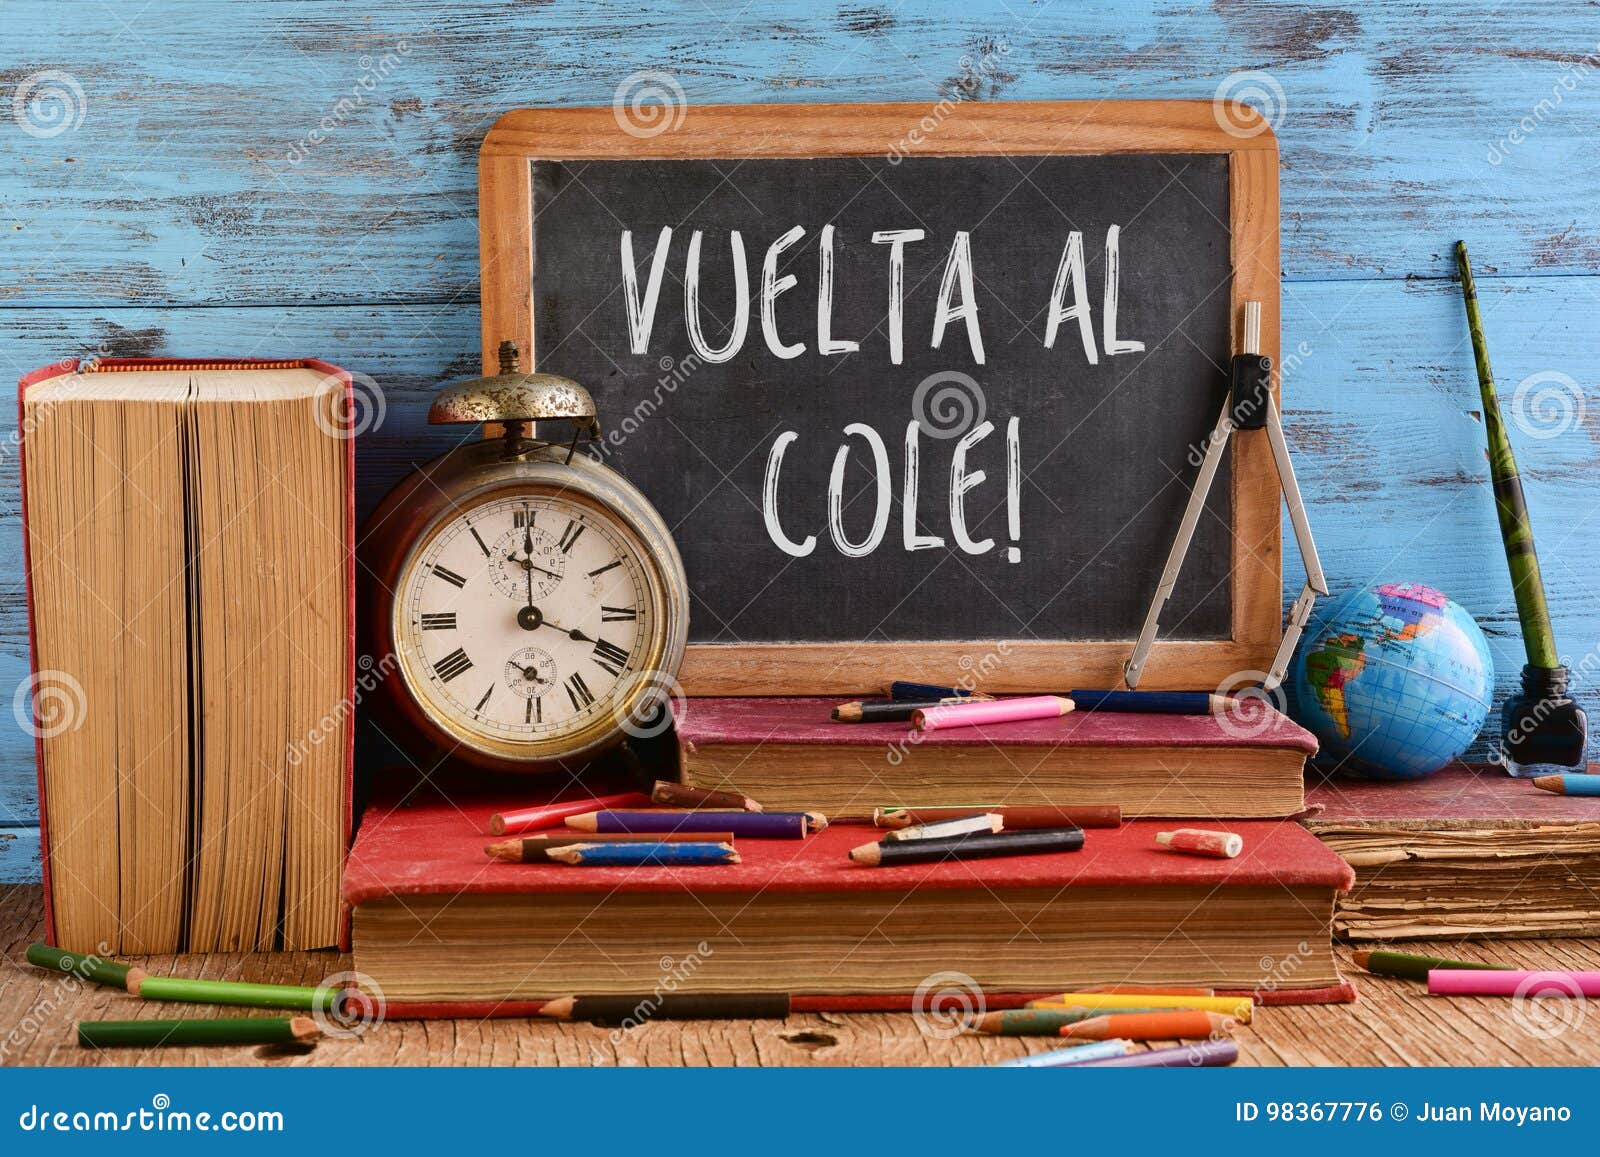 text vuelta al cole, back to school in spanish